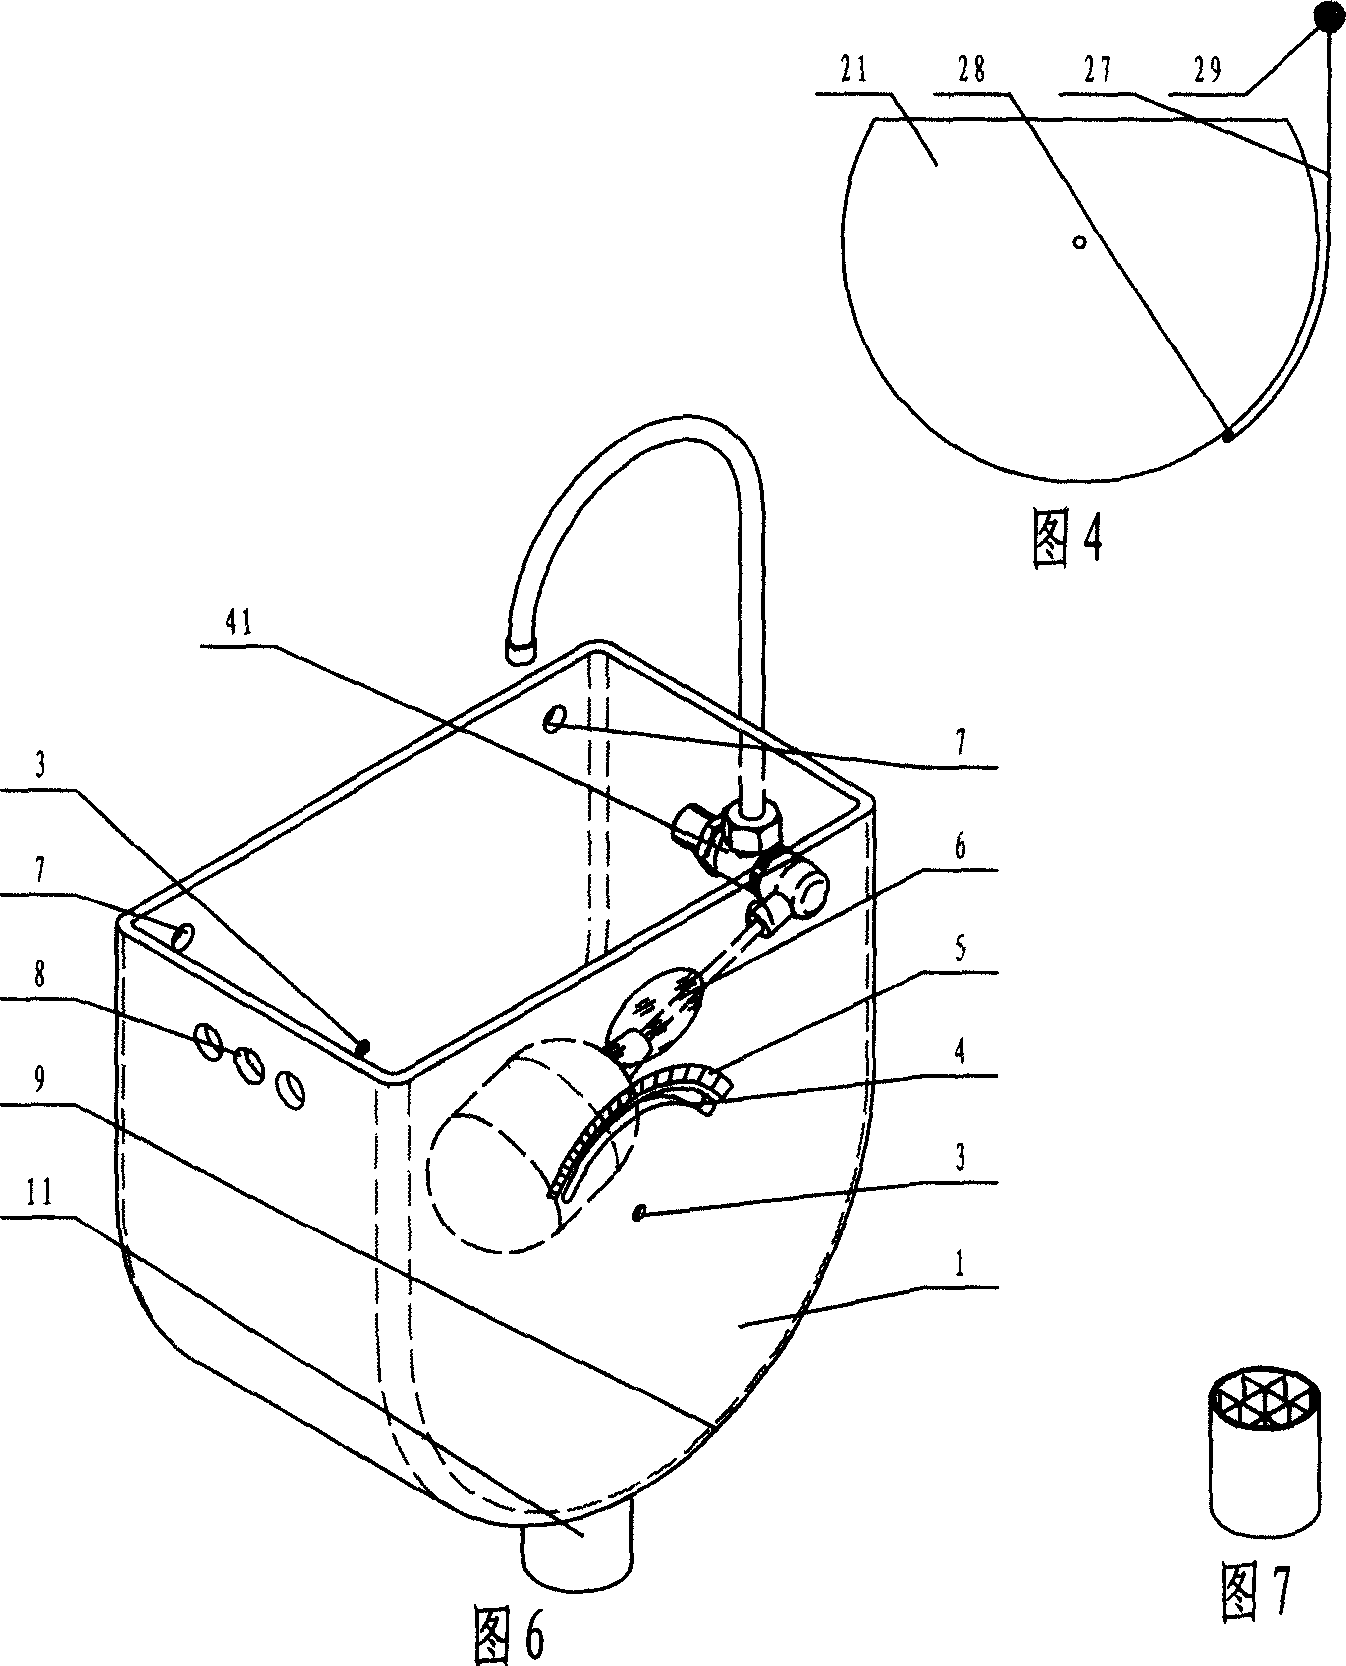 Non-leaking water-saving cistern according to requirement water